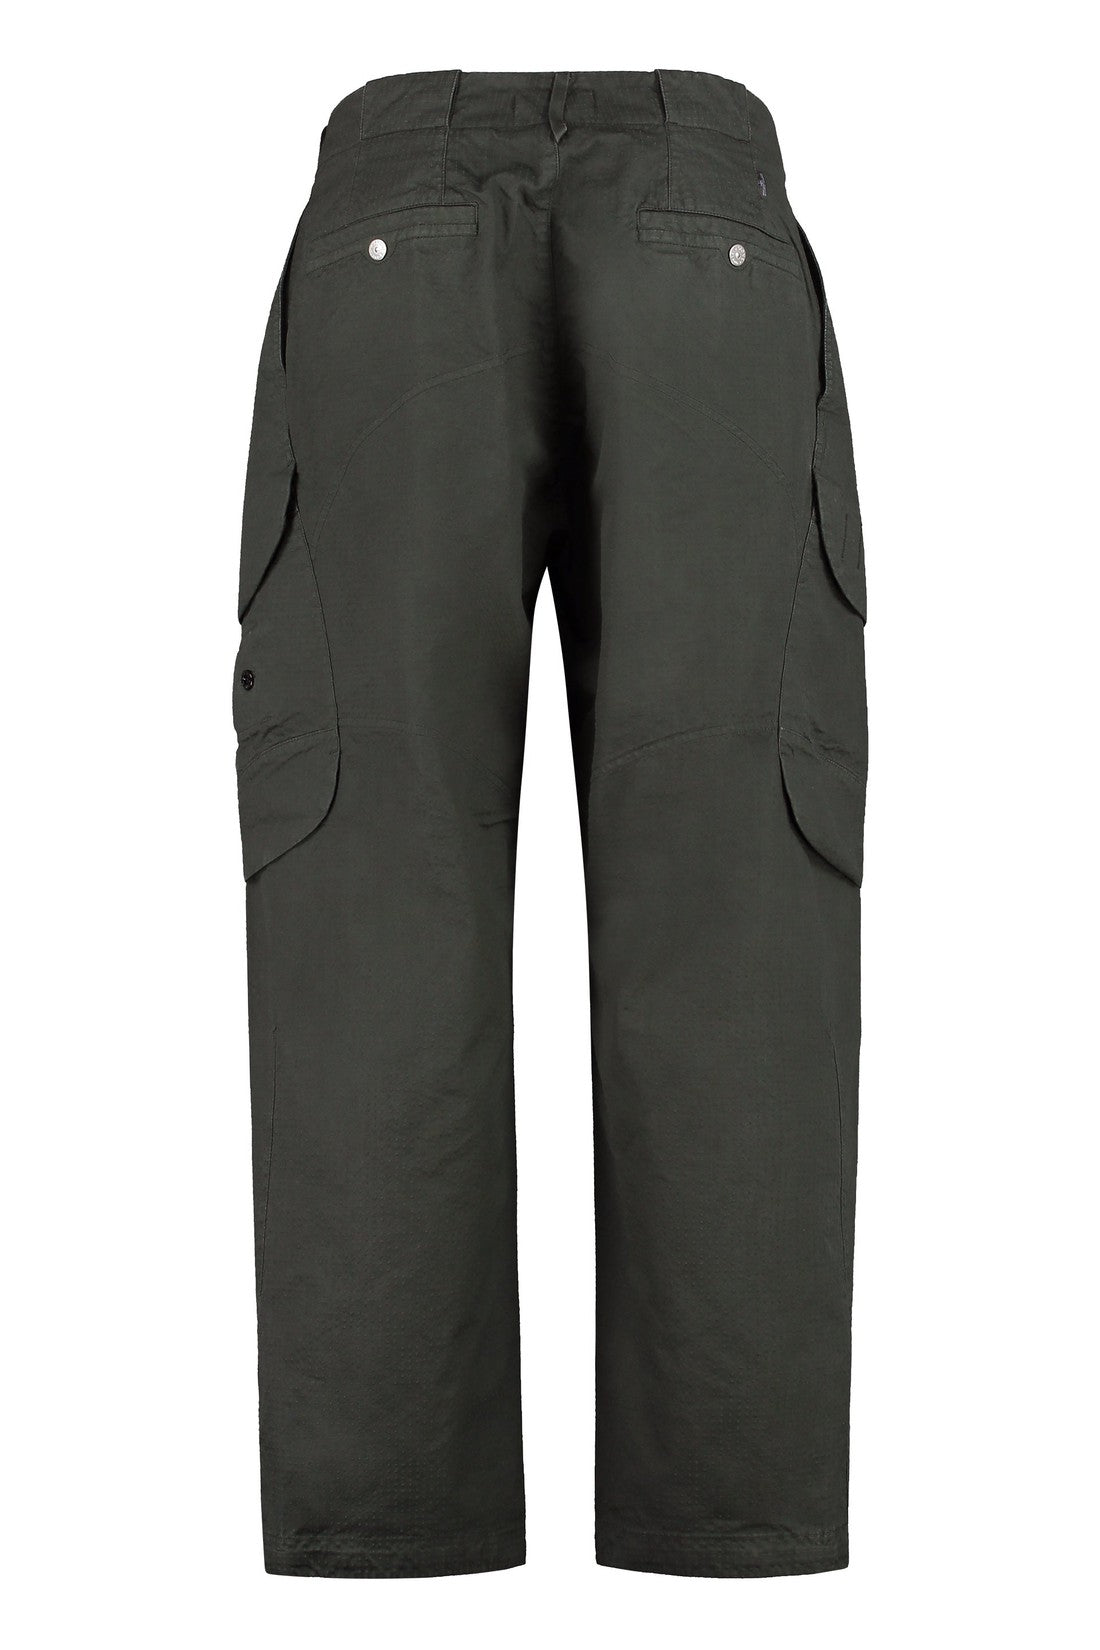 Stone Island Shadow Project-OUTLET-SALE-Multi-pocket cotton trousers-ARCHIVIST